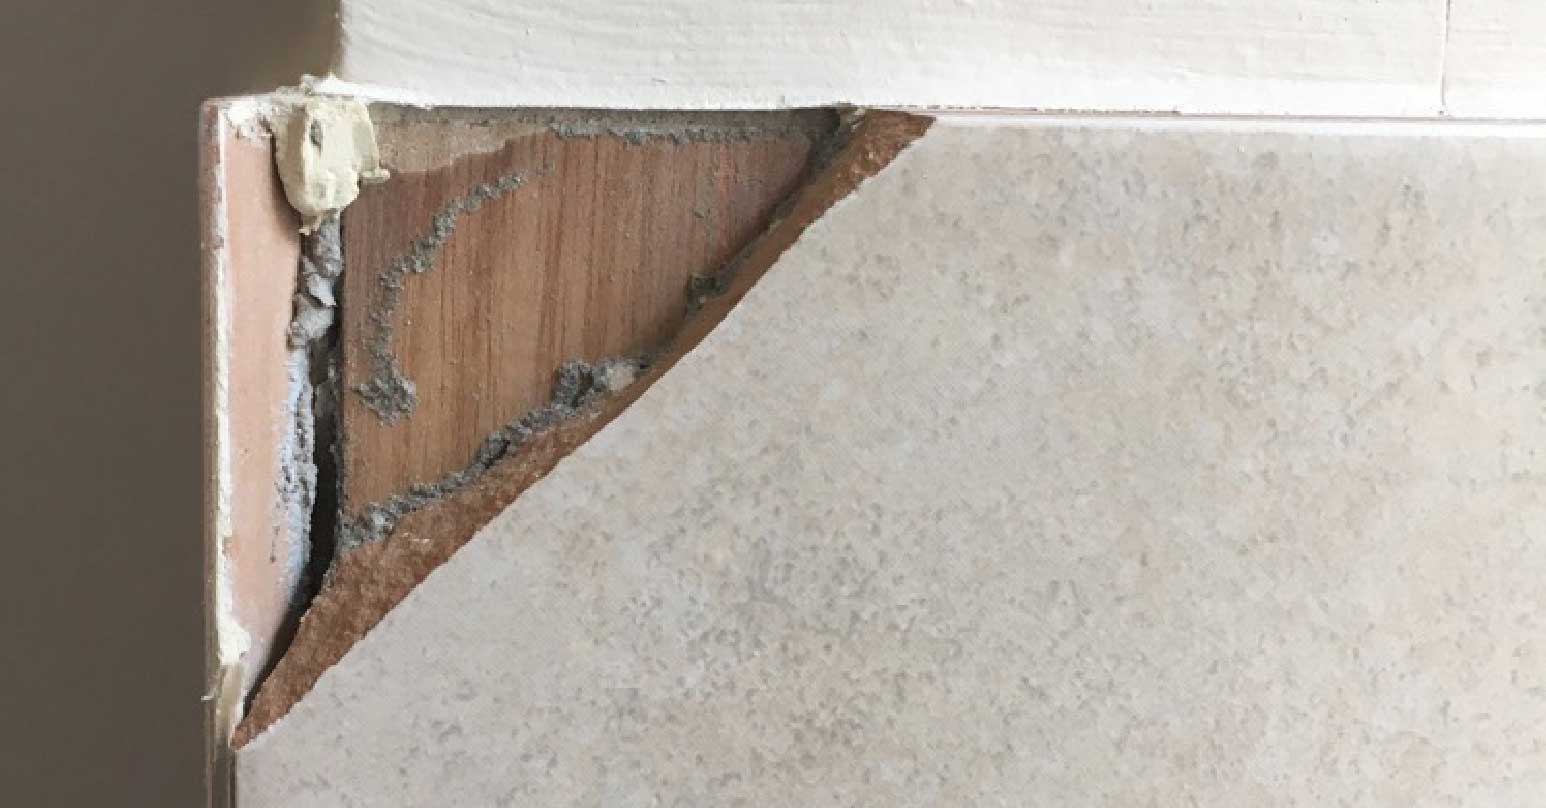 Chip damage to wall tile - Before repair